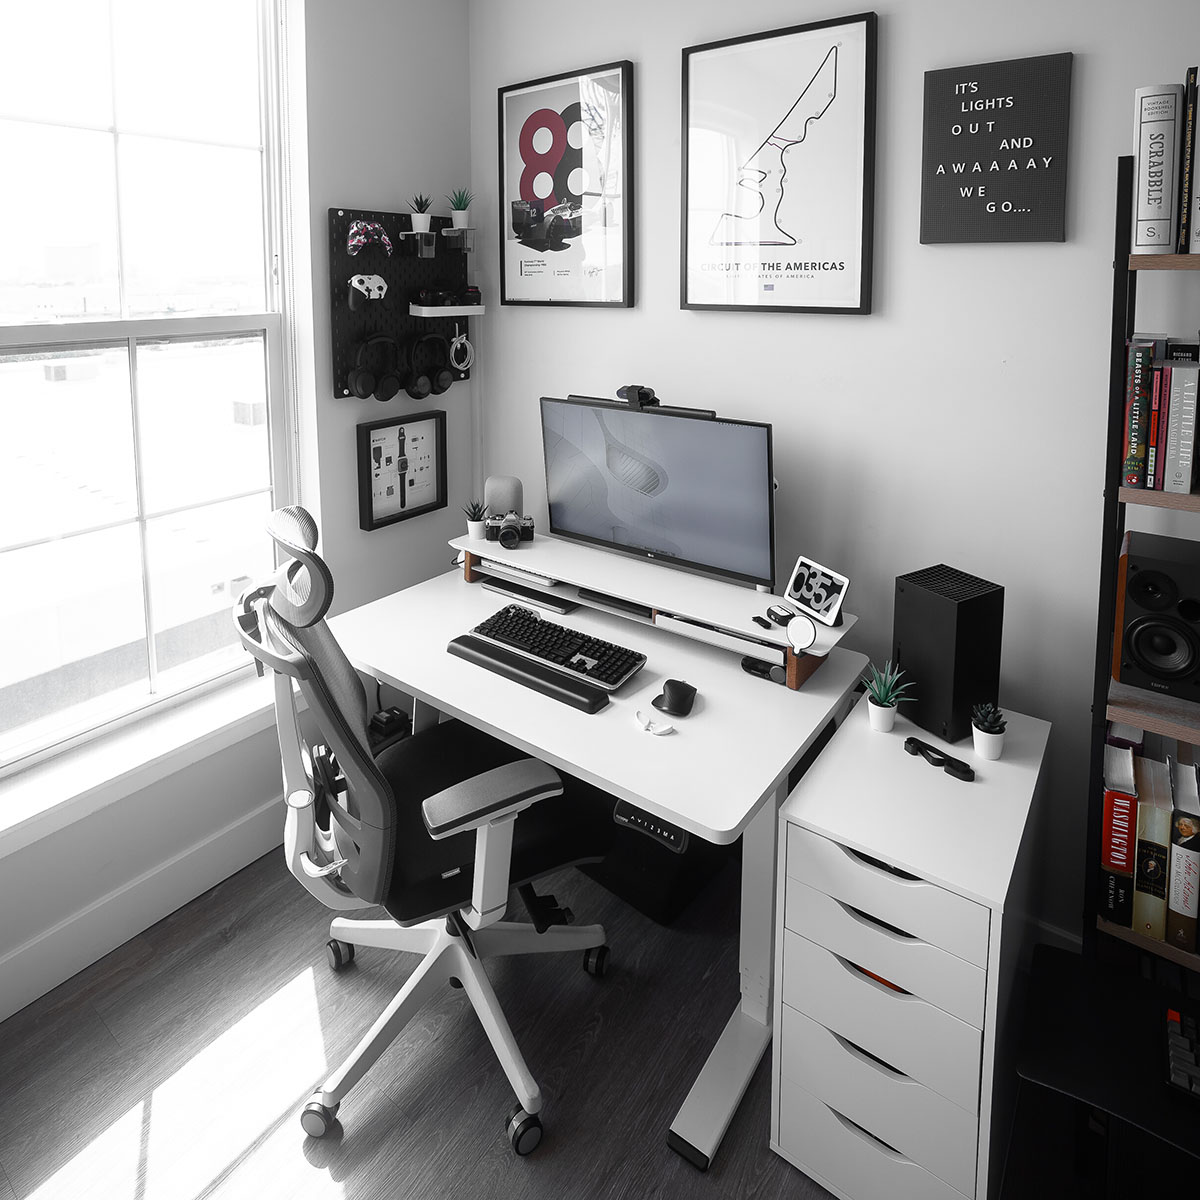 Full view of Cam DiCecca's home offise setup with a Kensington Mechanical Keyboard